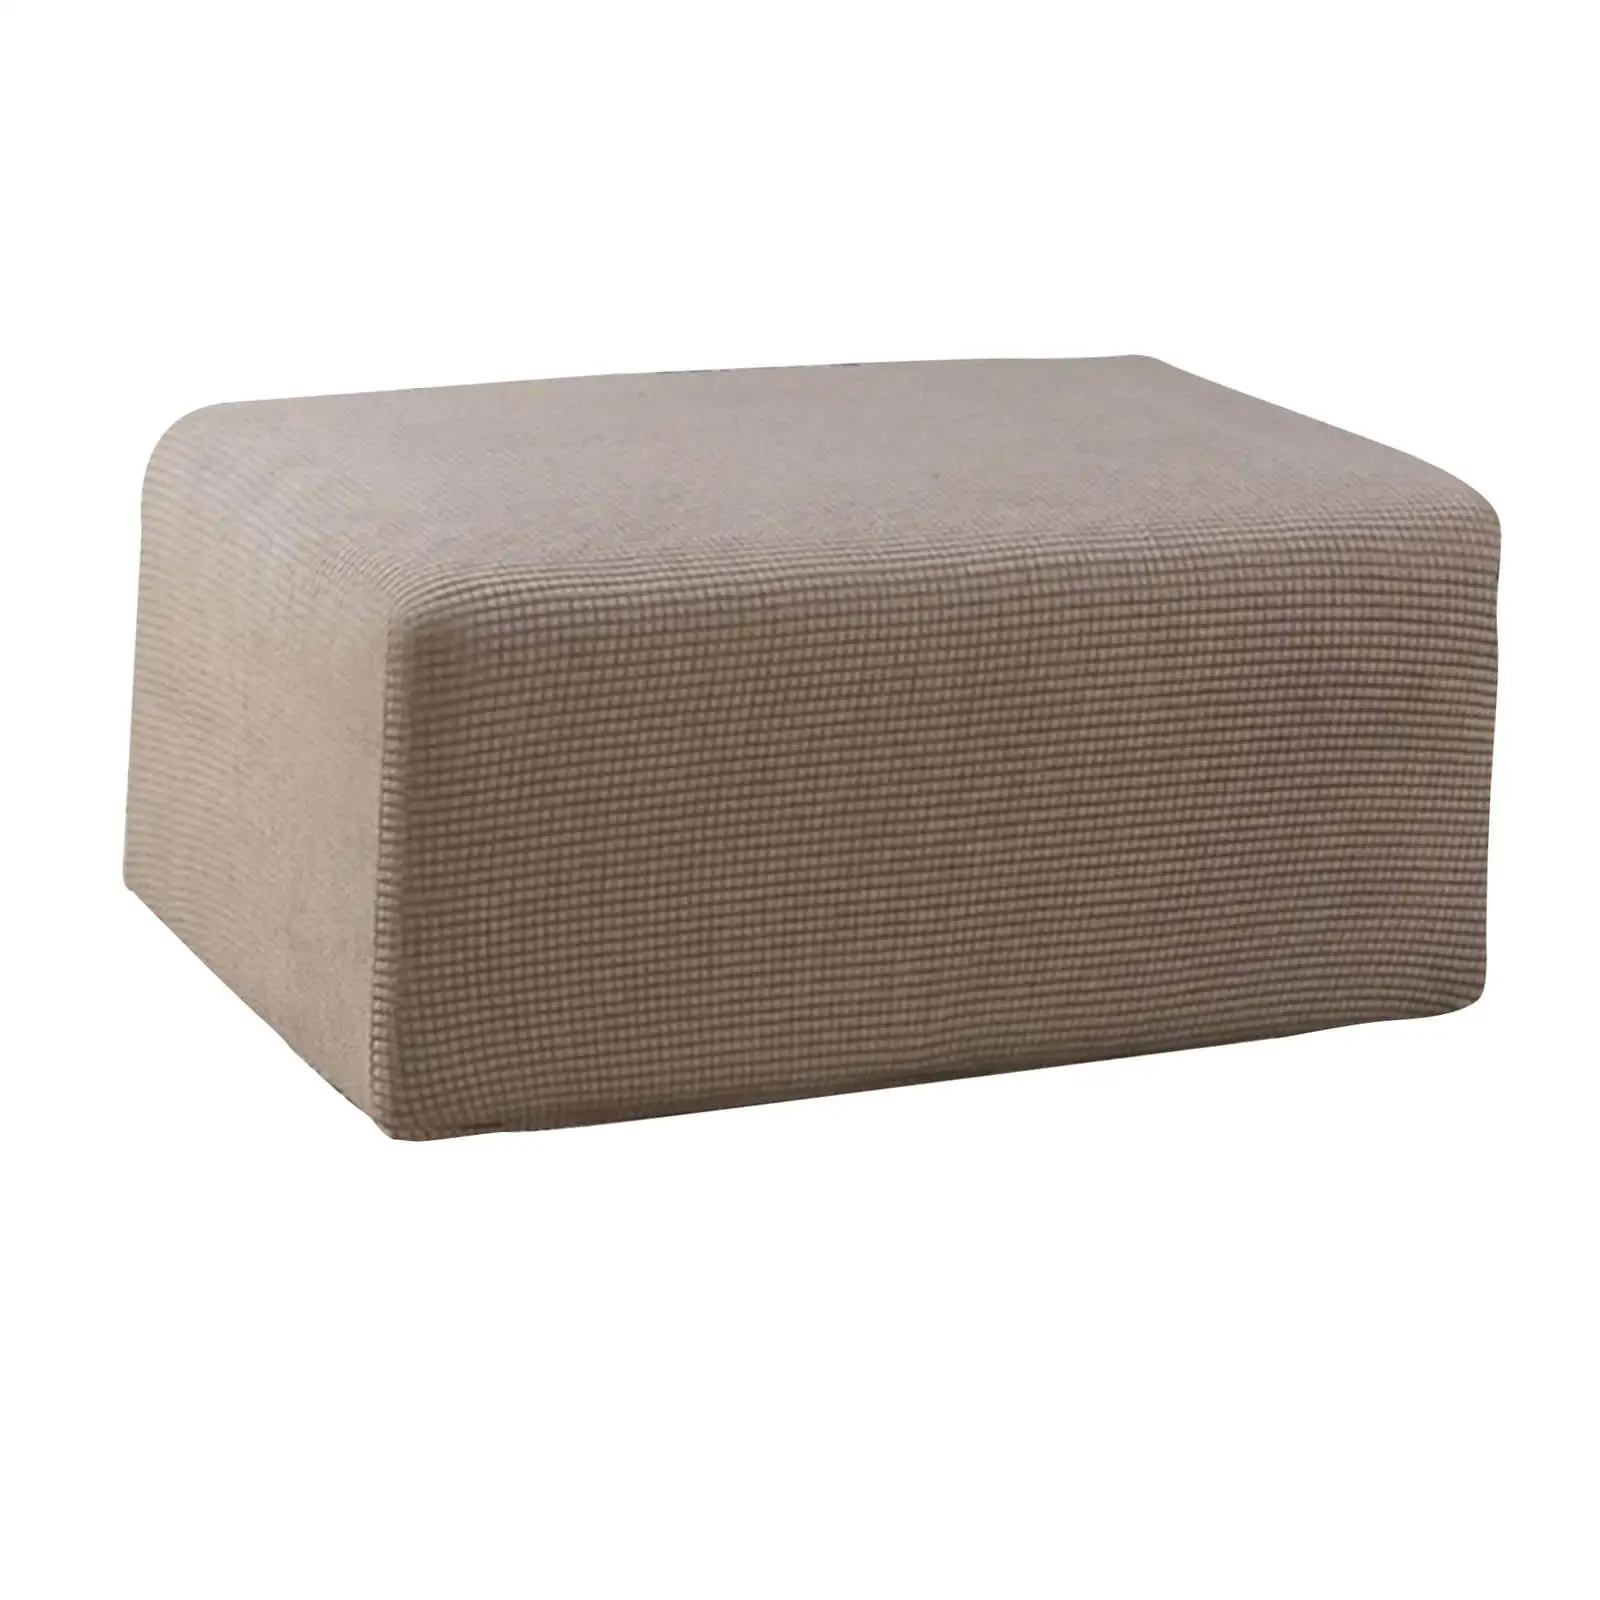 High Stretch Ottoman Cover Rectangle Footrest Cover Machine Washable with Elastic Bottom Rectangle Storage Stool Slipcovers